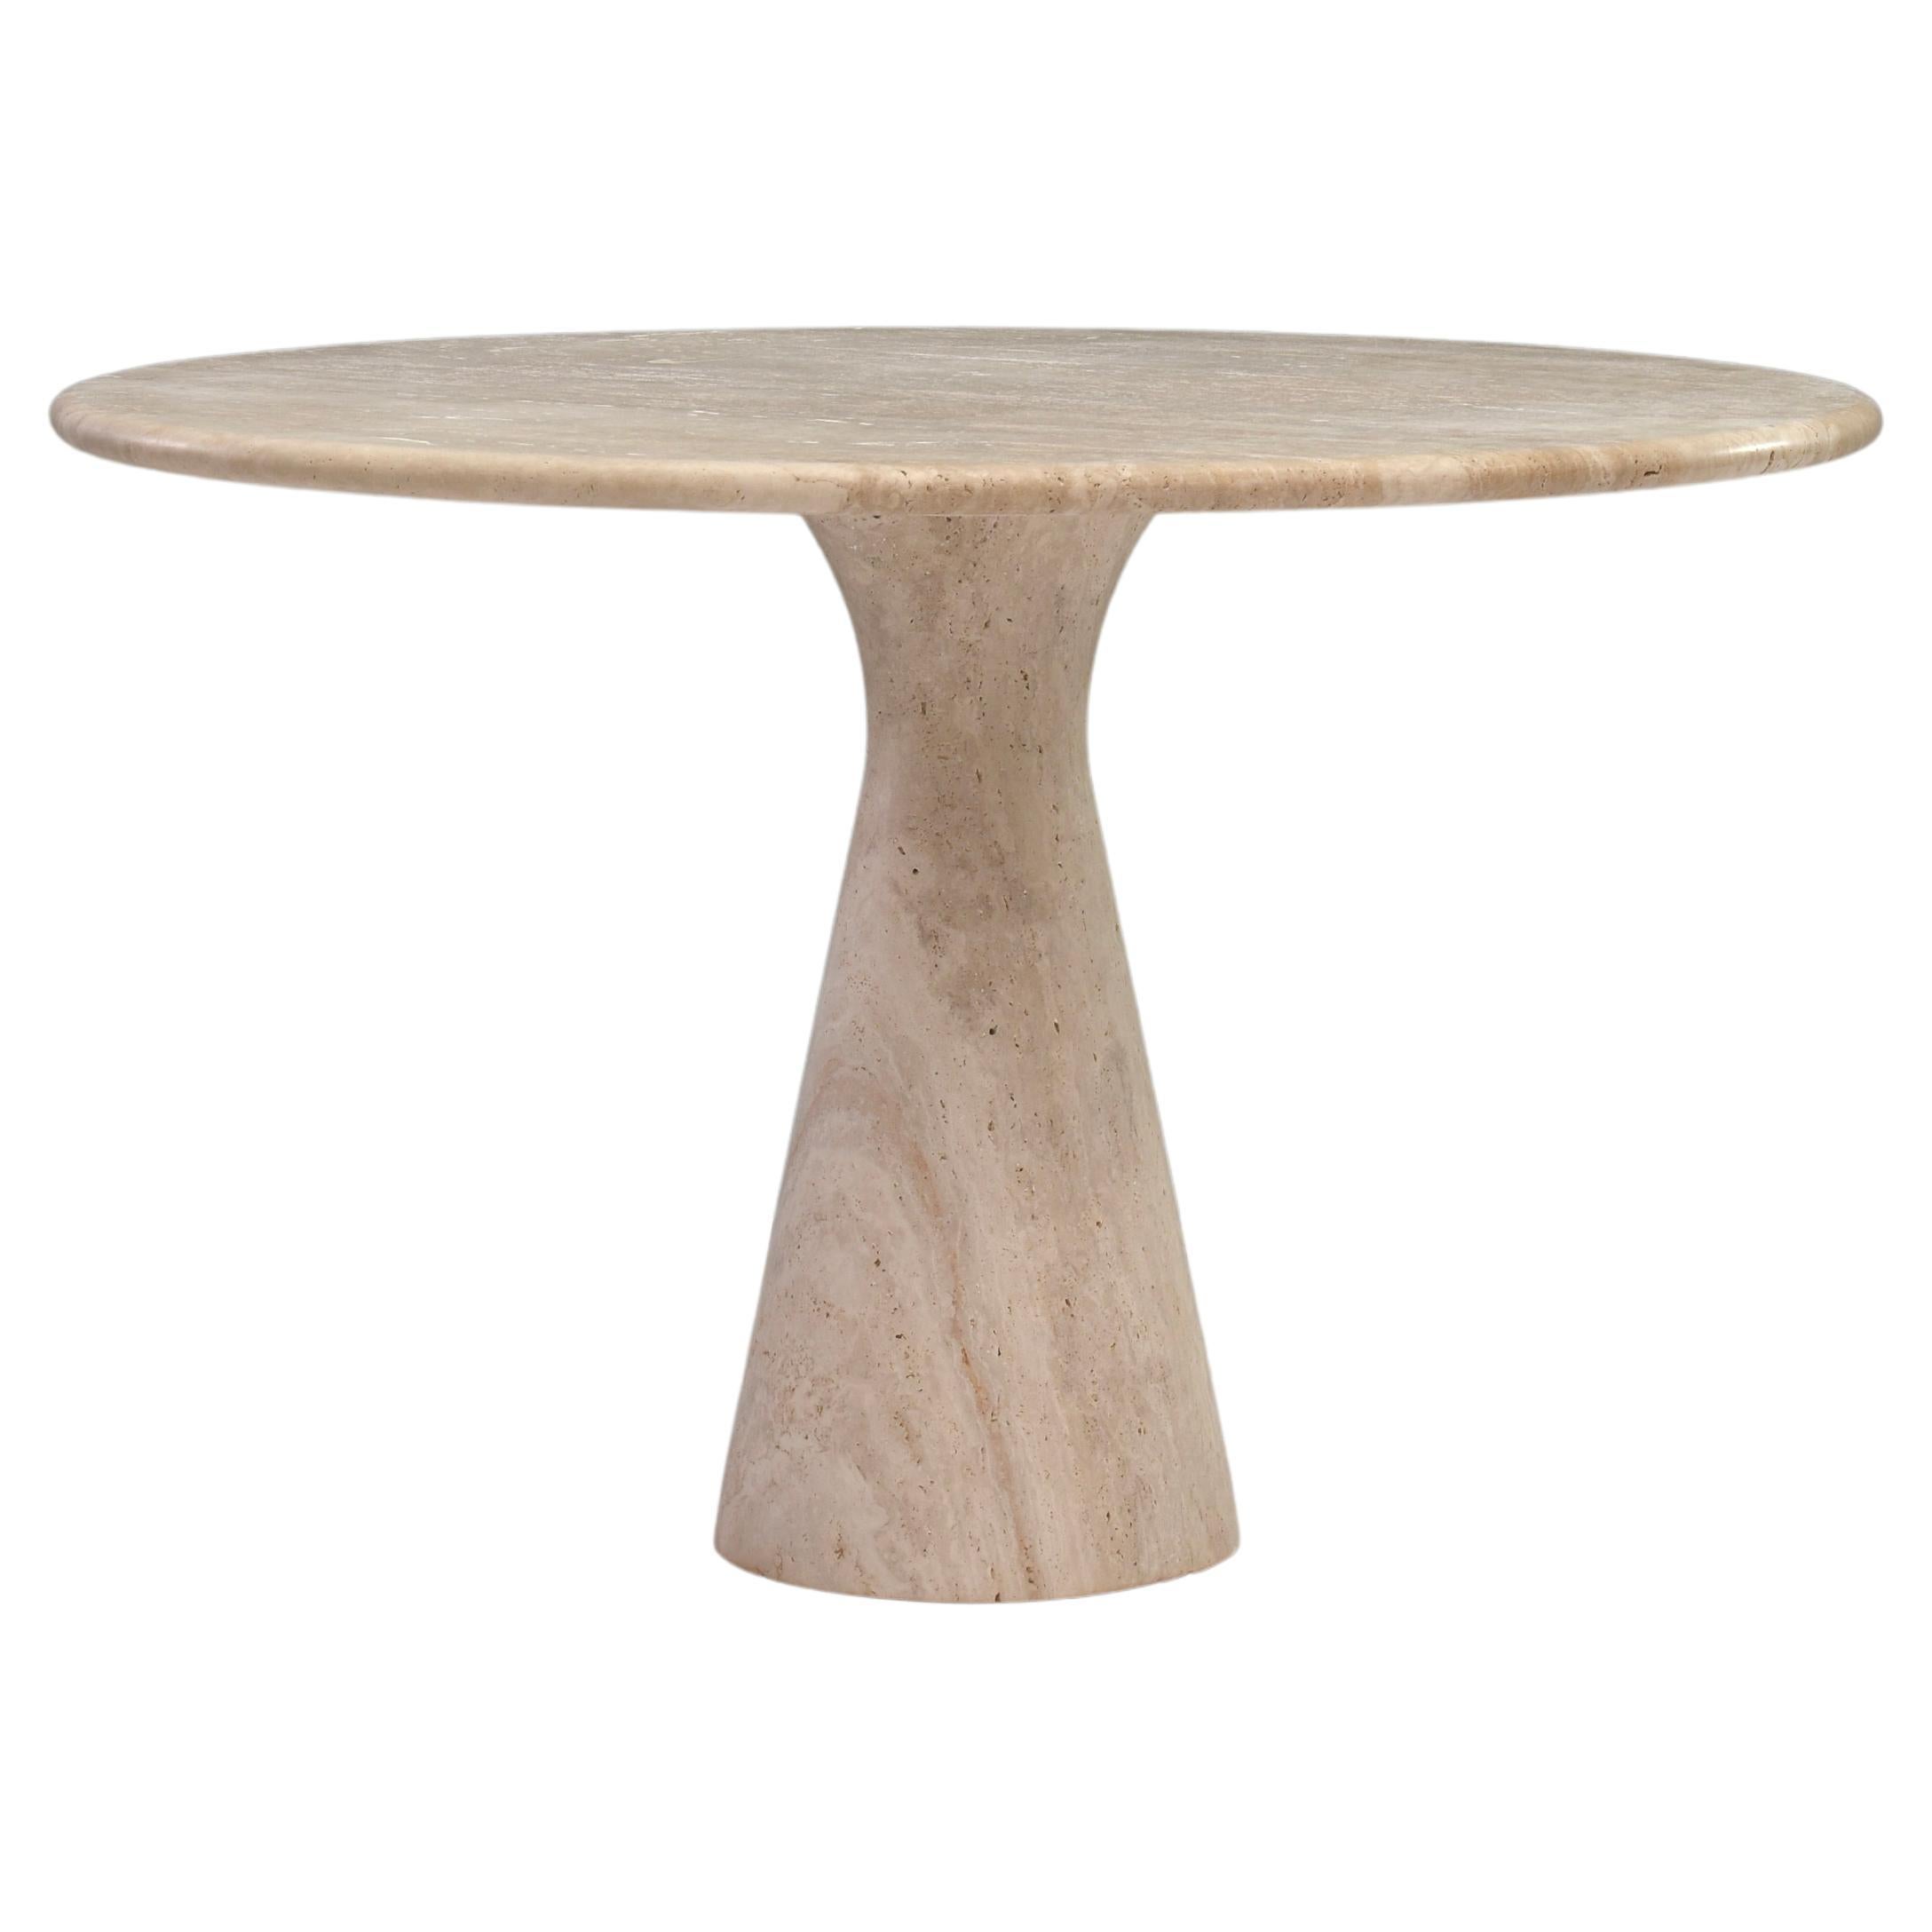 Exquisite Round Travertine Dining Table in the manor of Angelo Mangiarotti/Up&Up